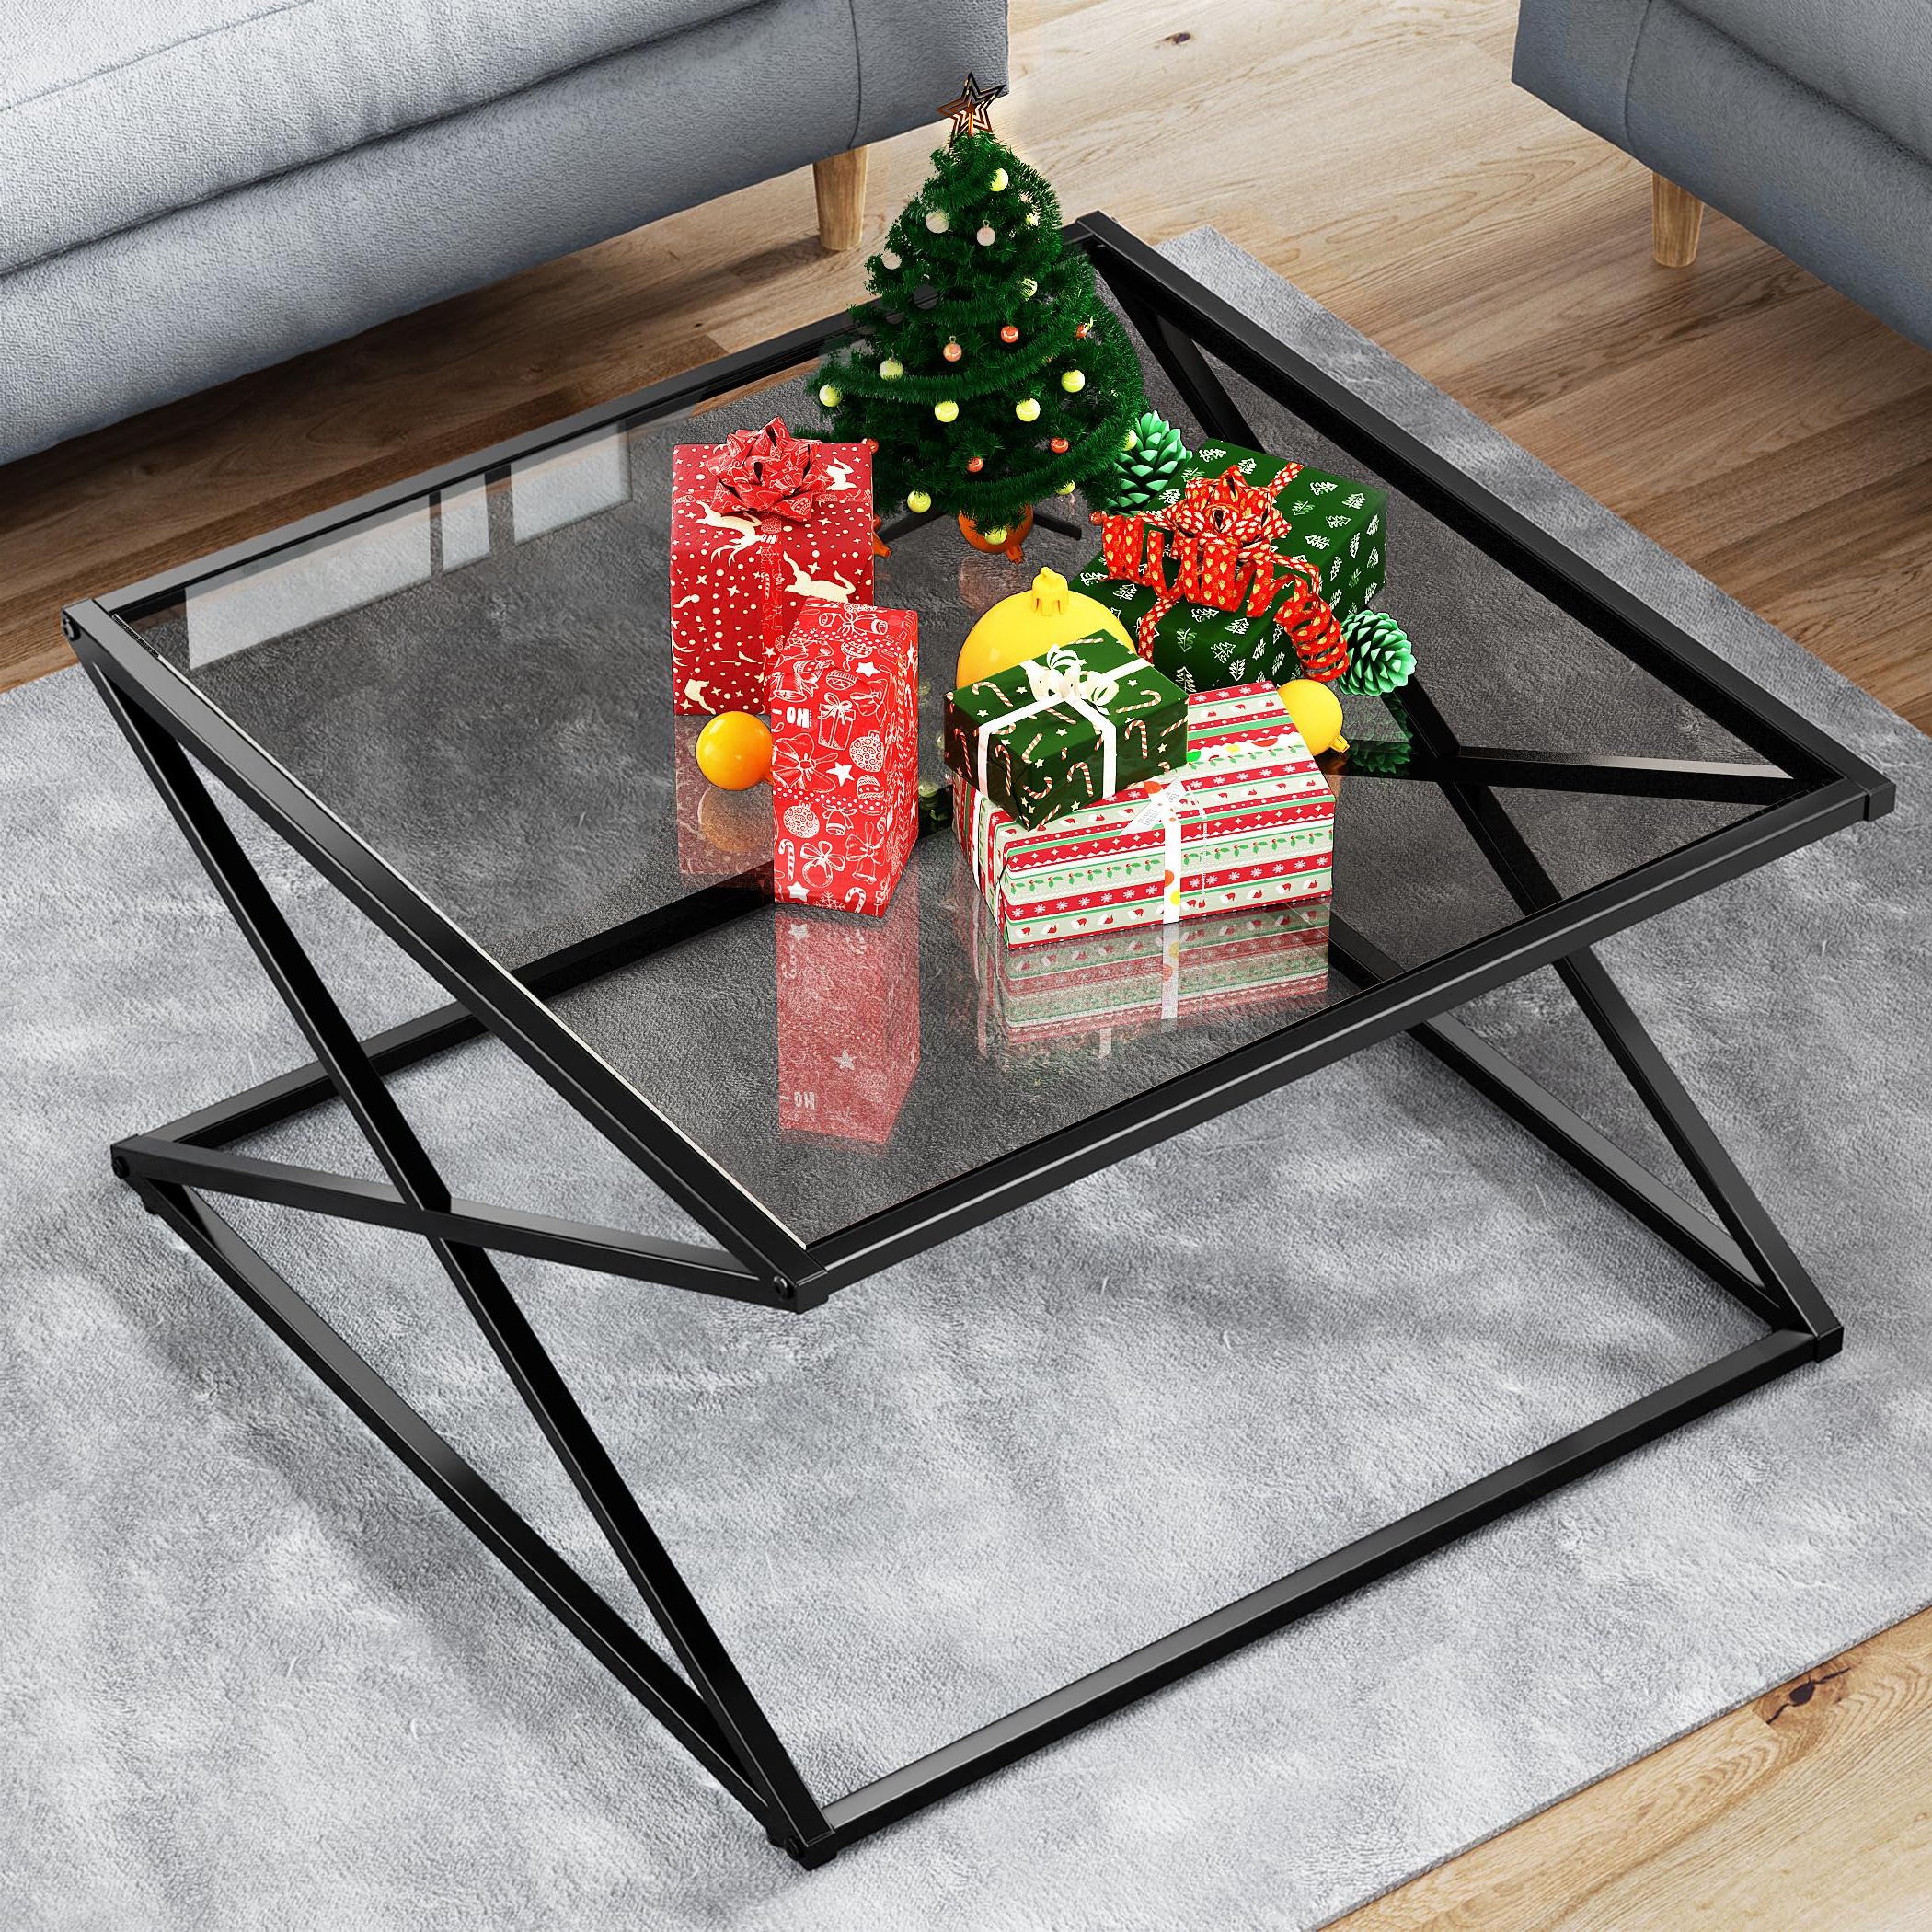 Latest Tempered Glass Coffee Tables Regarding Amazon: Glass Coffee Table,  (View 5 of 10)